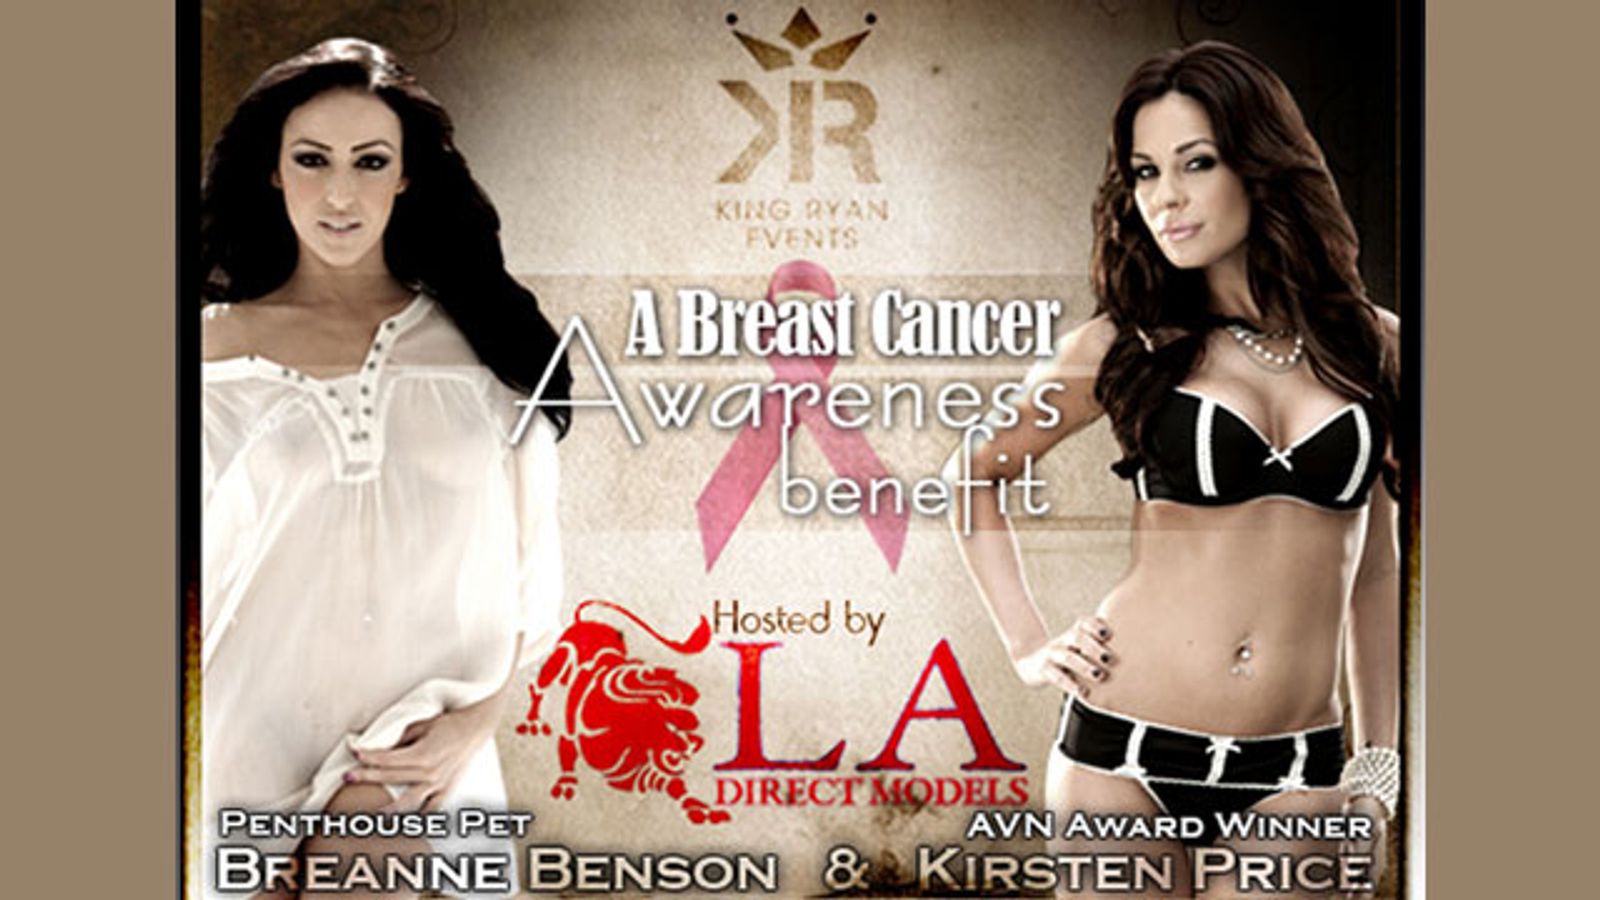 AEBN, Immoral, King Ryan, LA Direct Throw Party for Breast Cancer Charity